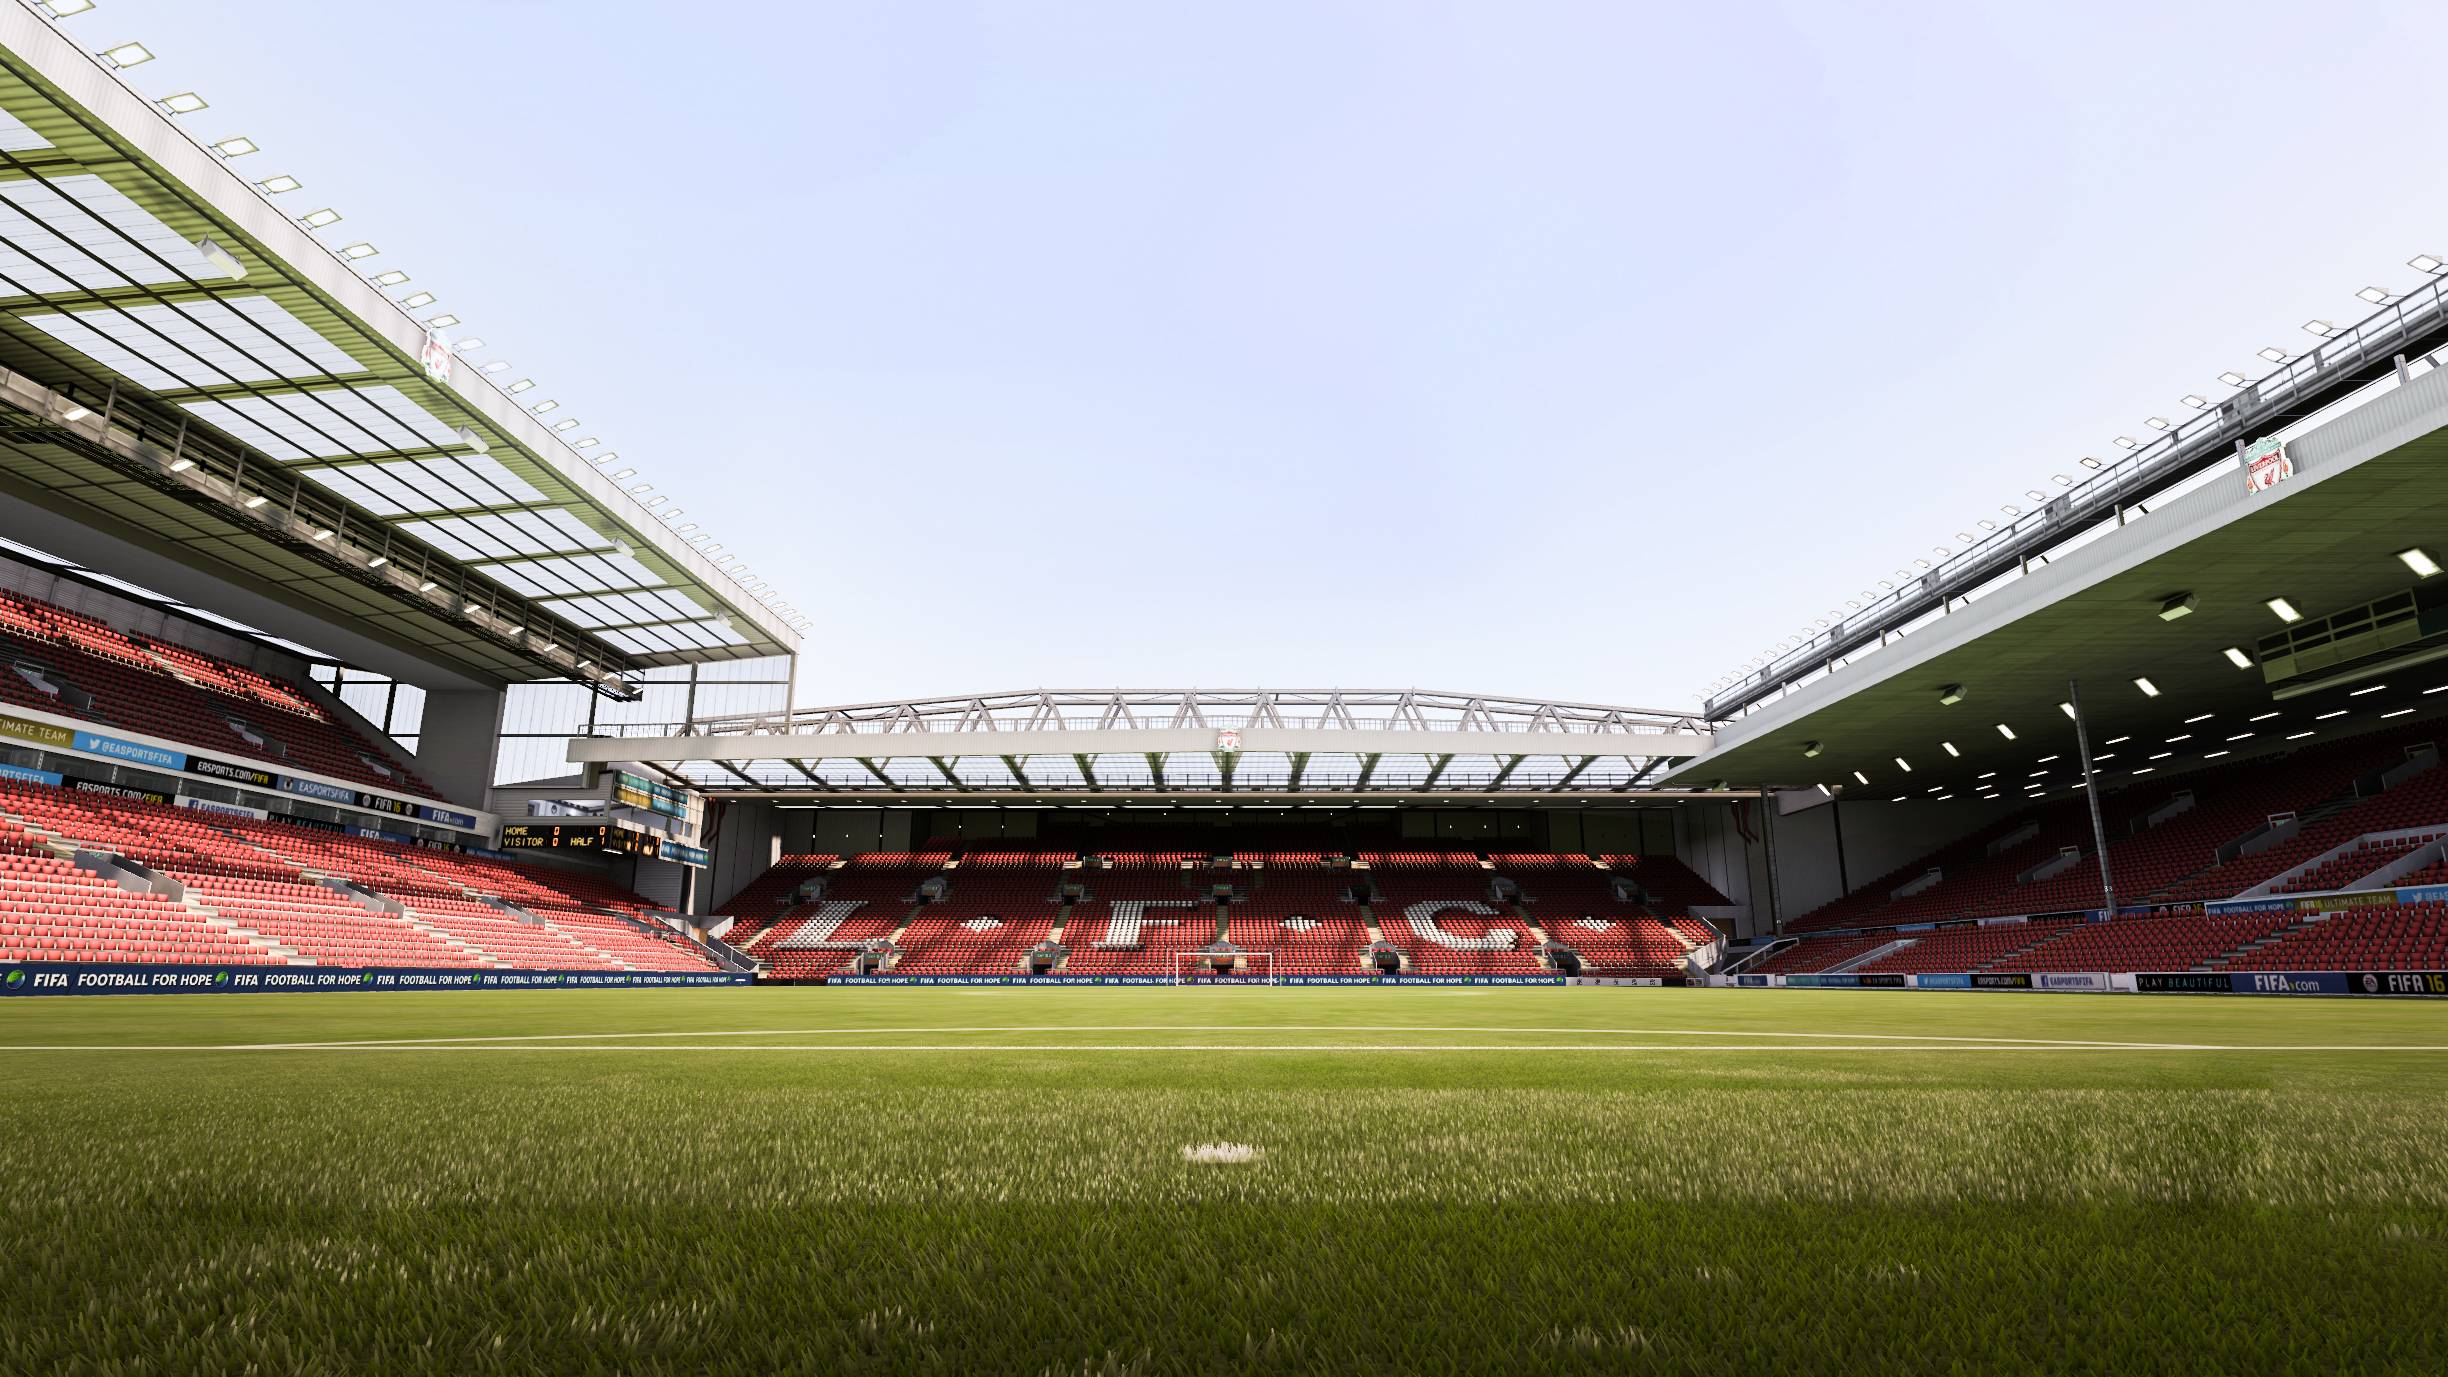 Anfield wallpaper I made from the stadium in FIFA 16